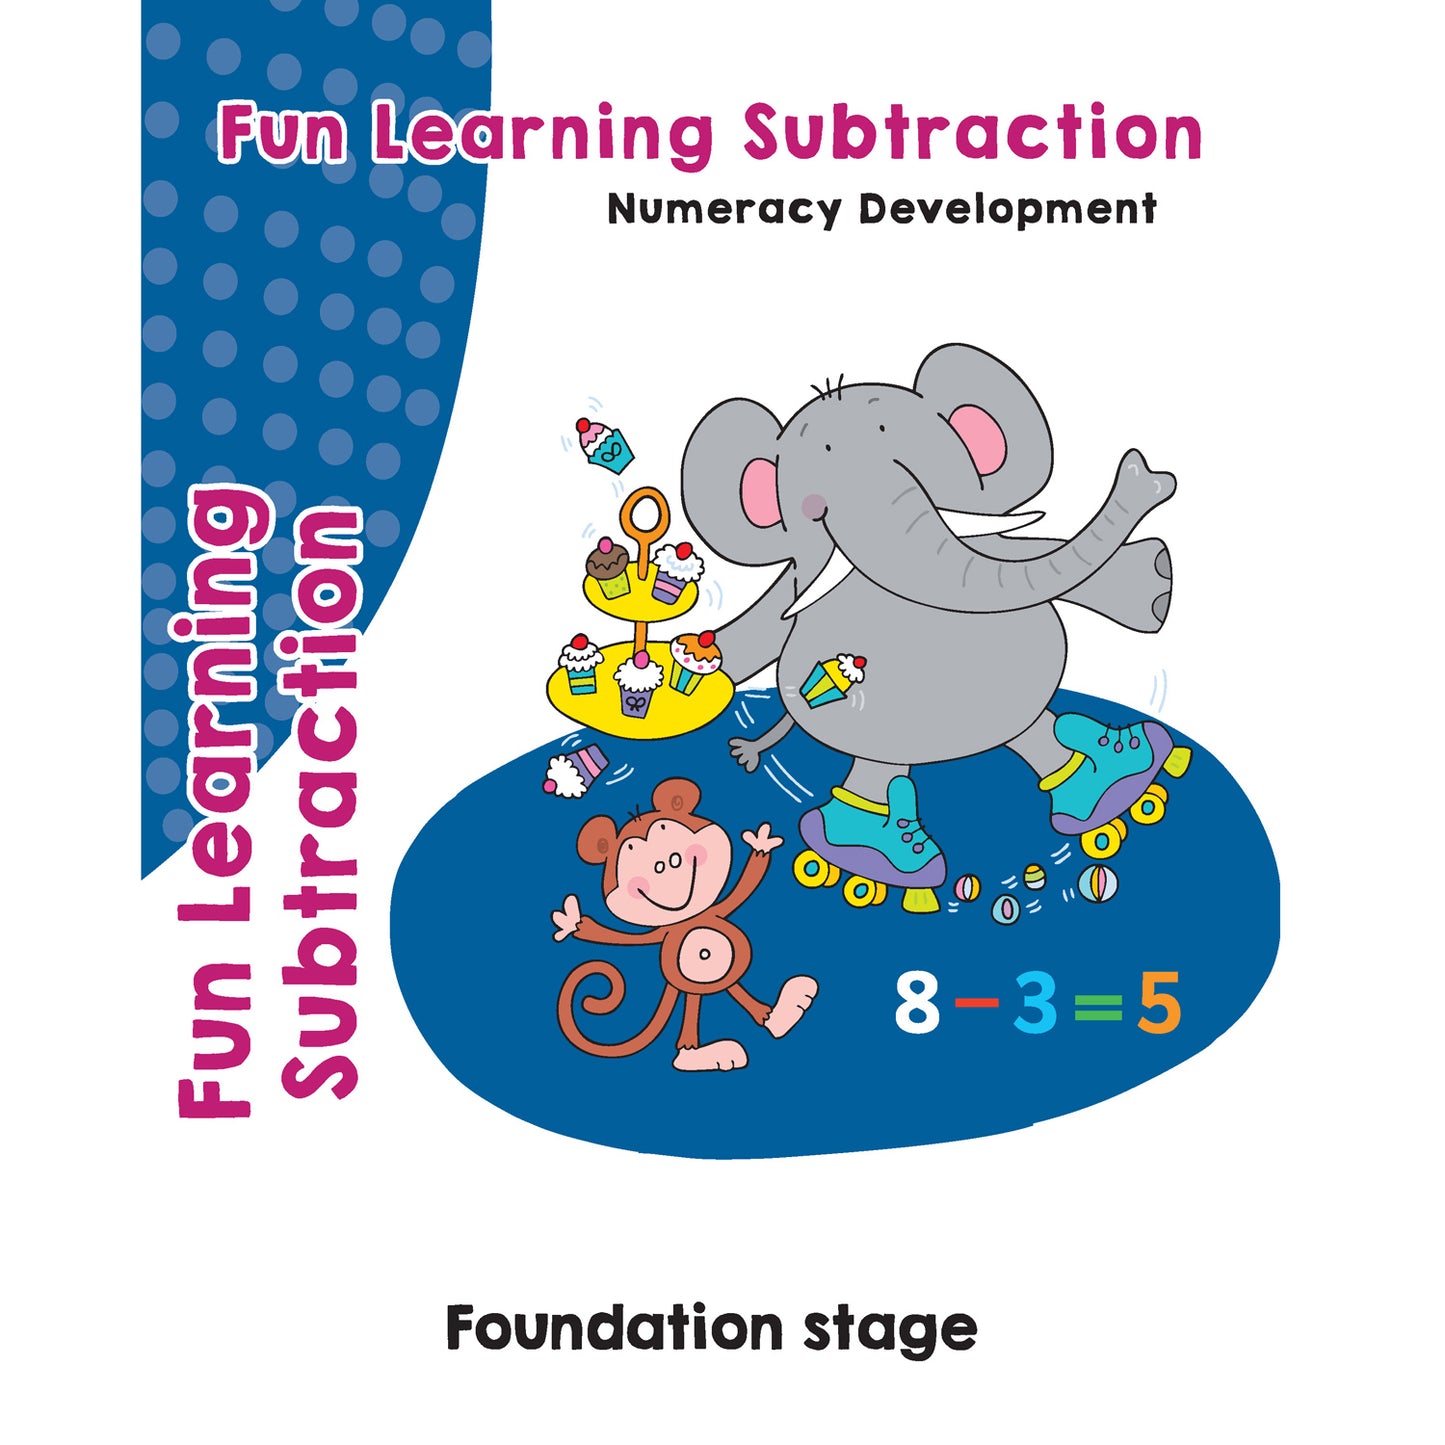 Fun Learning Subtraction Numeracy Development